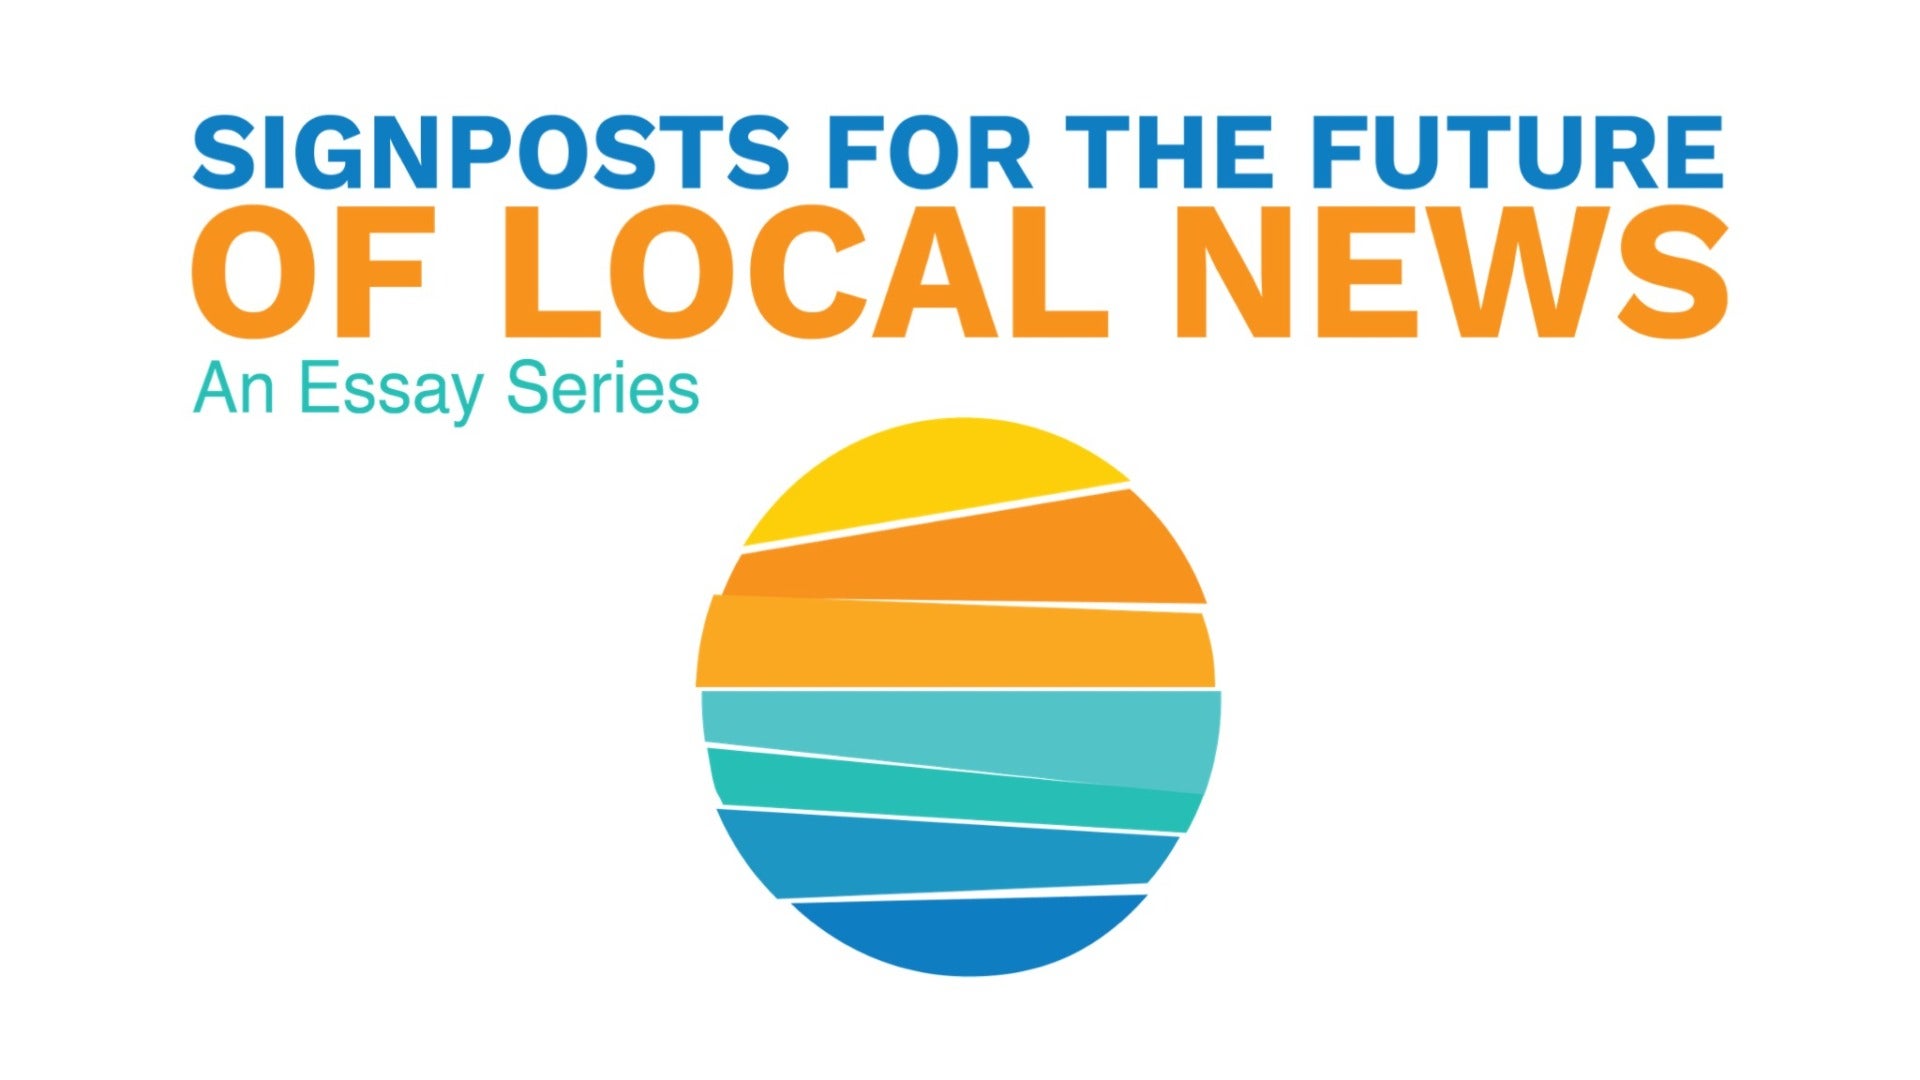 Signposts for the Future of Local News